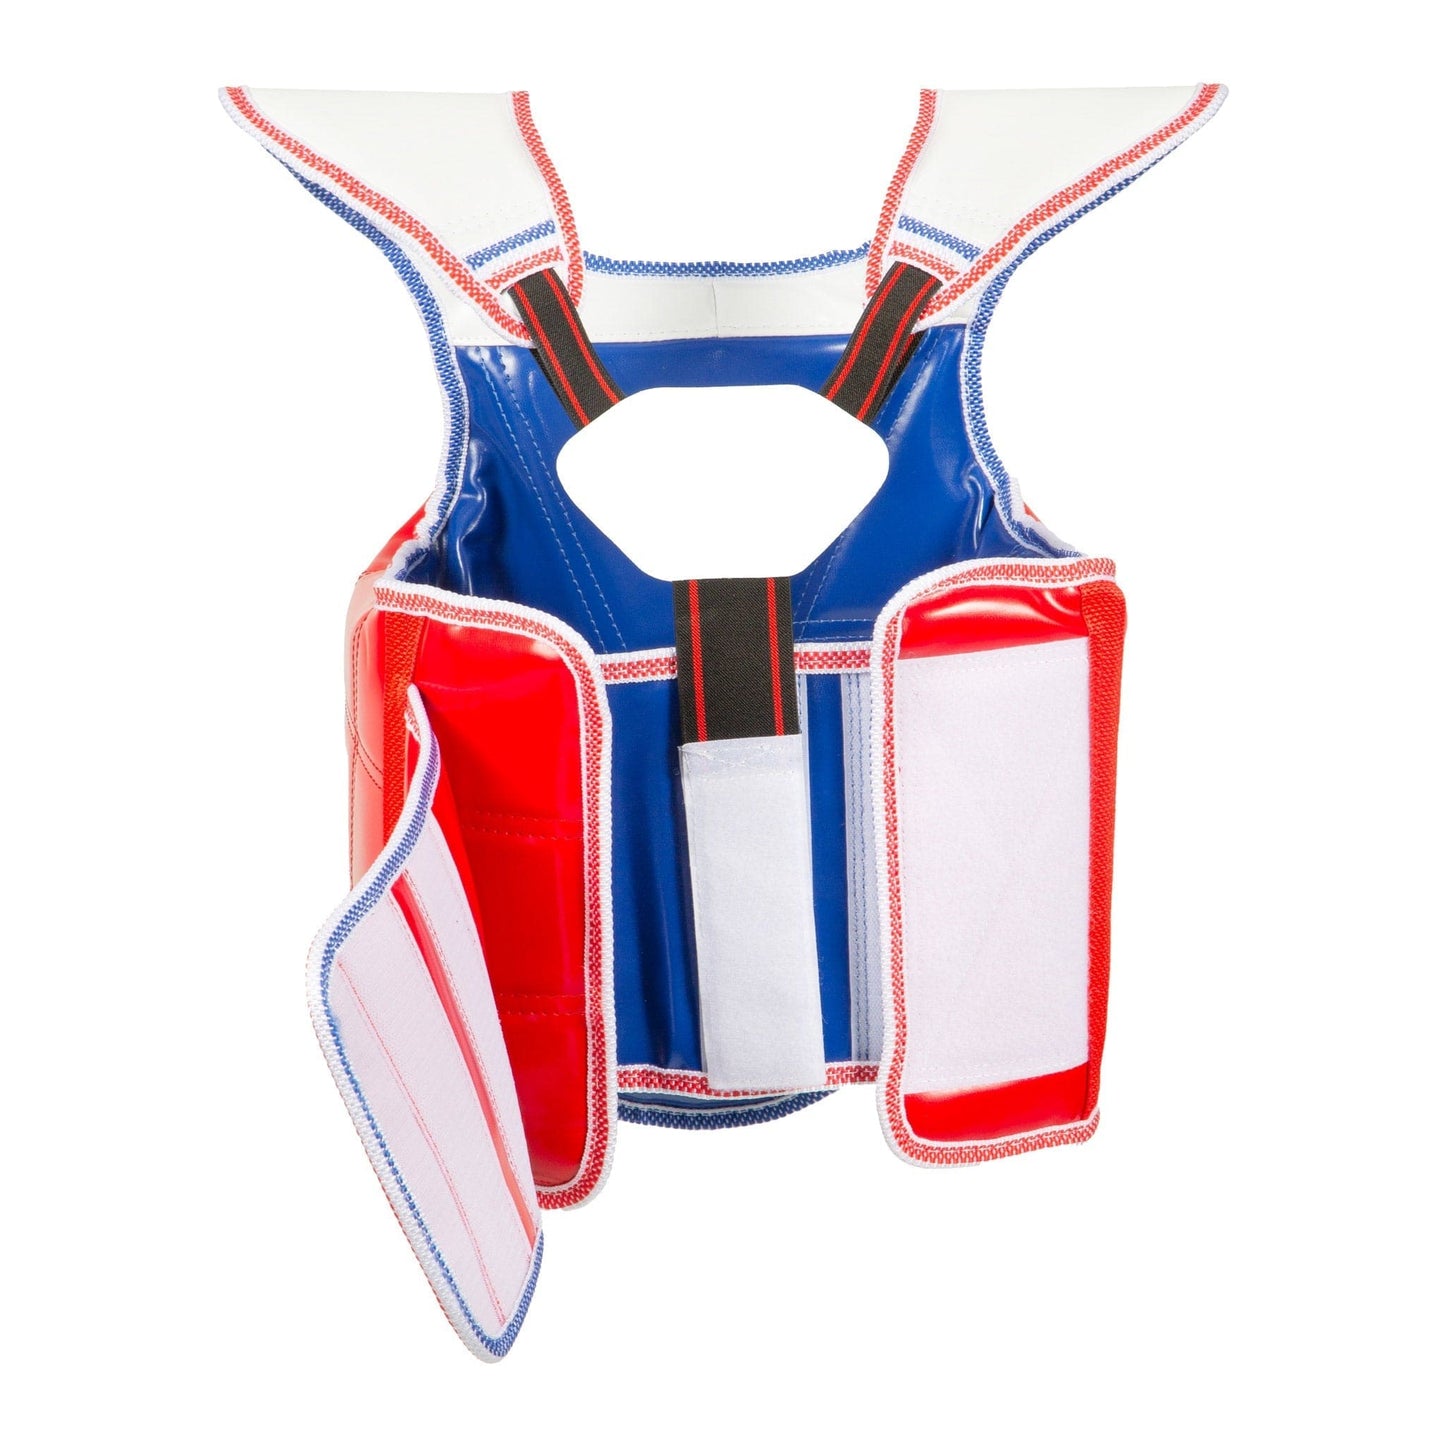 ProForce chest protector ProForce Ultra Reversible TKD Chest Guard